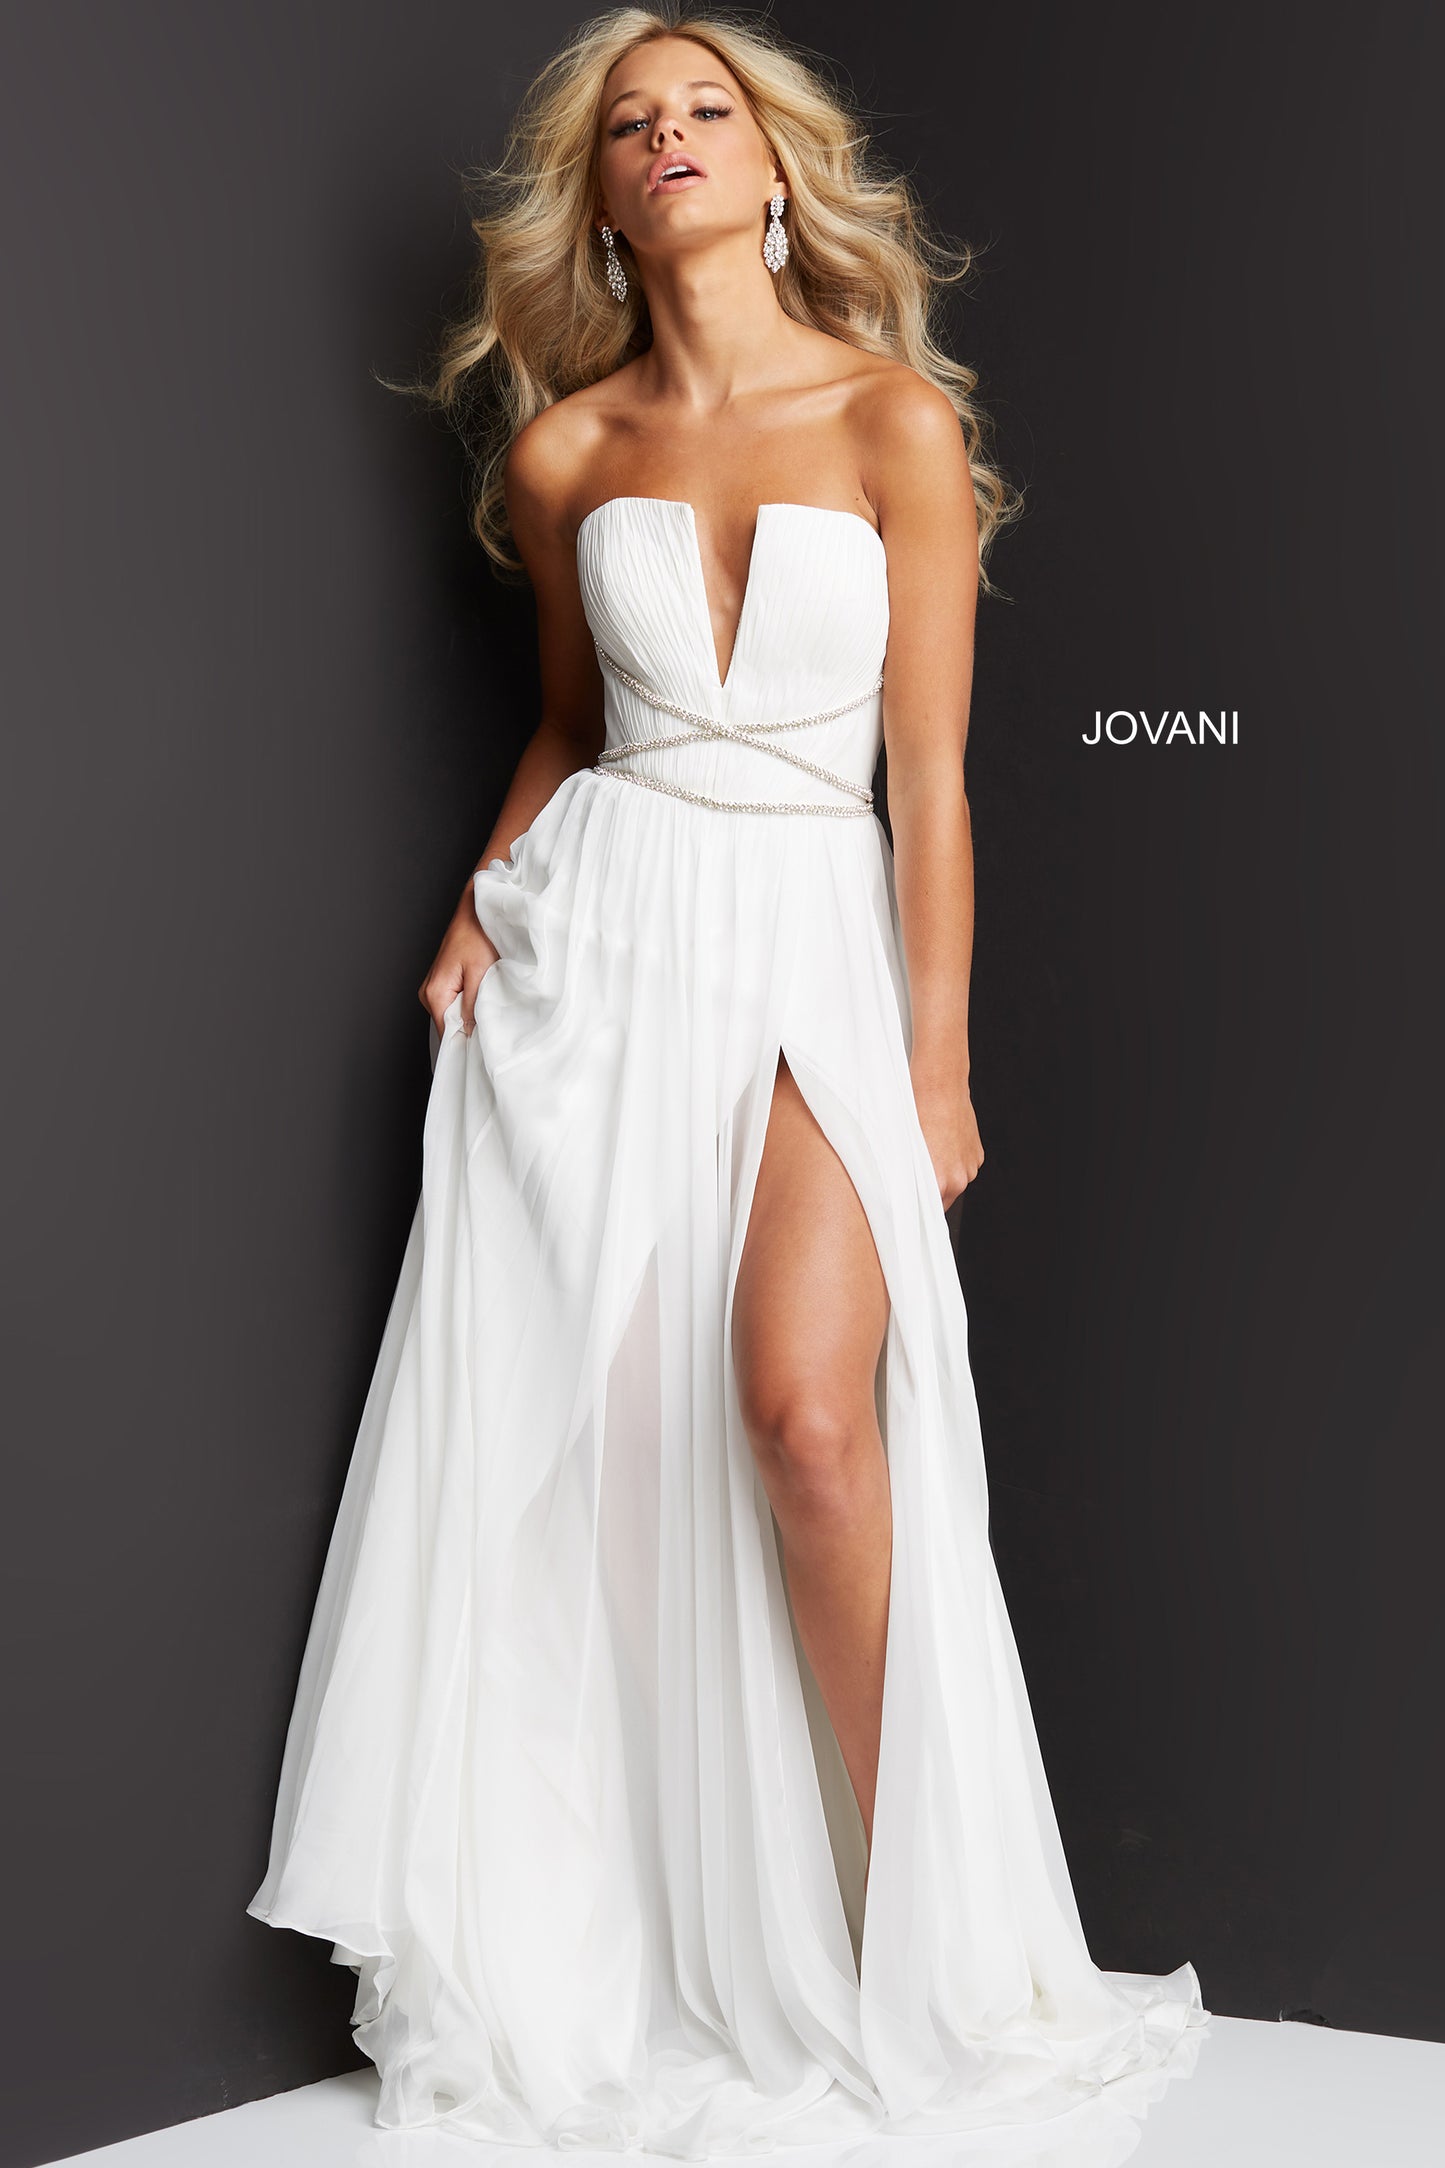 Jovani 05971 Long A Line Prom Dress Evening Gown